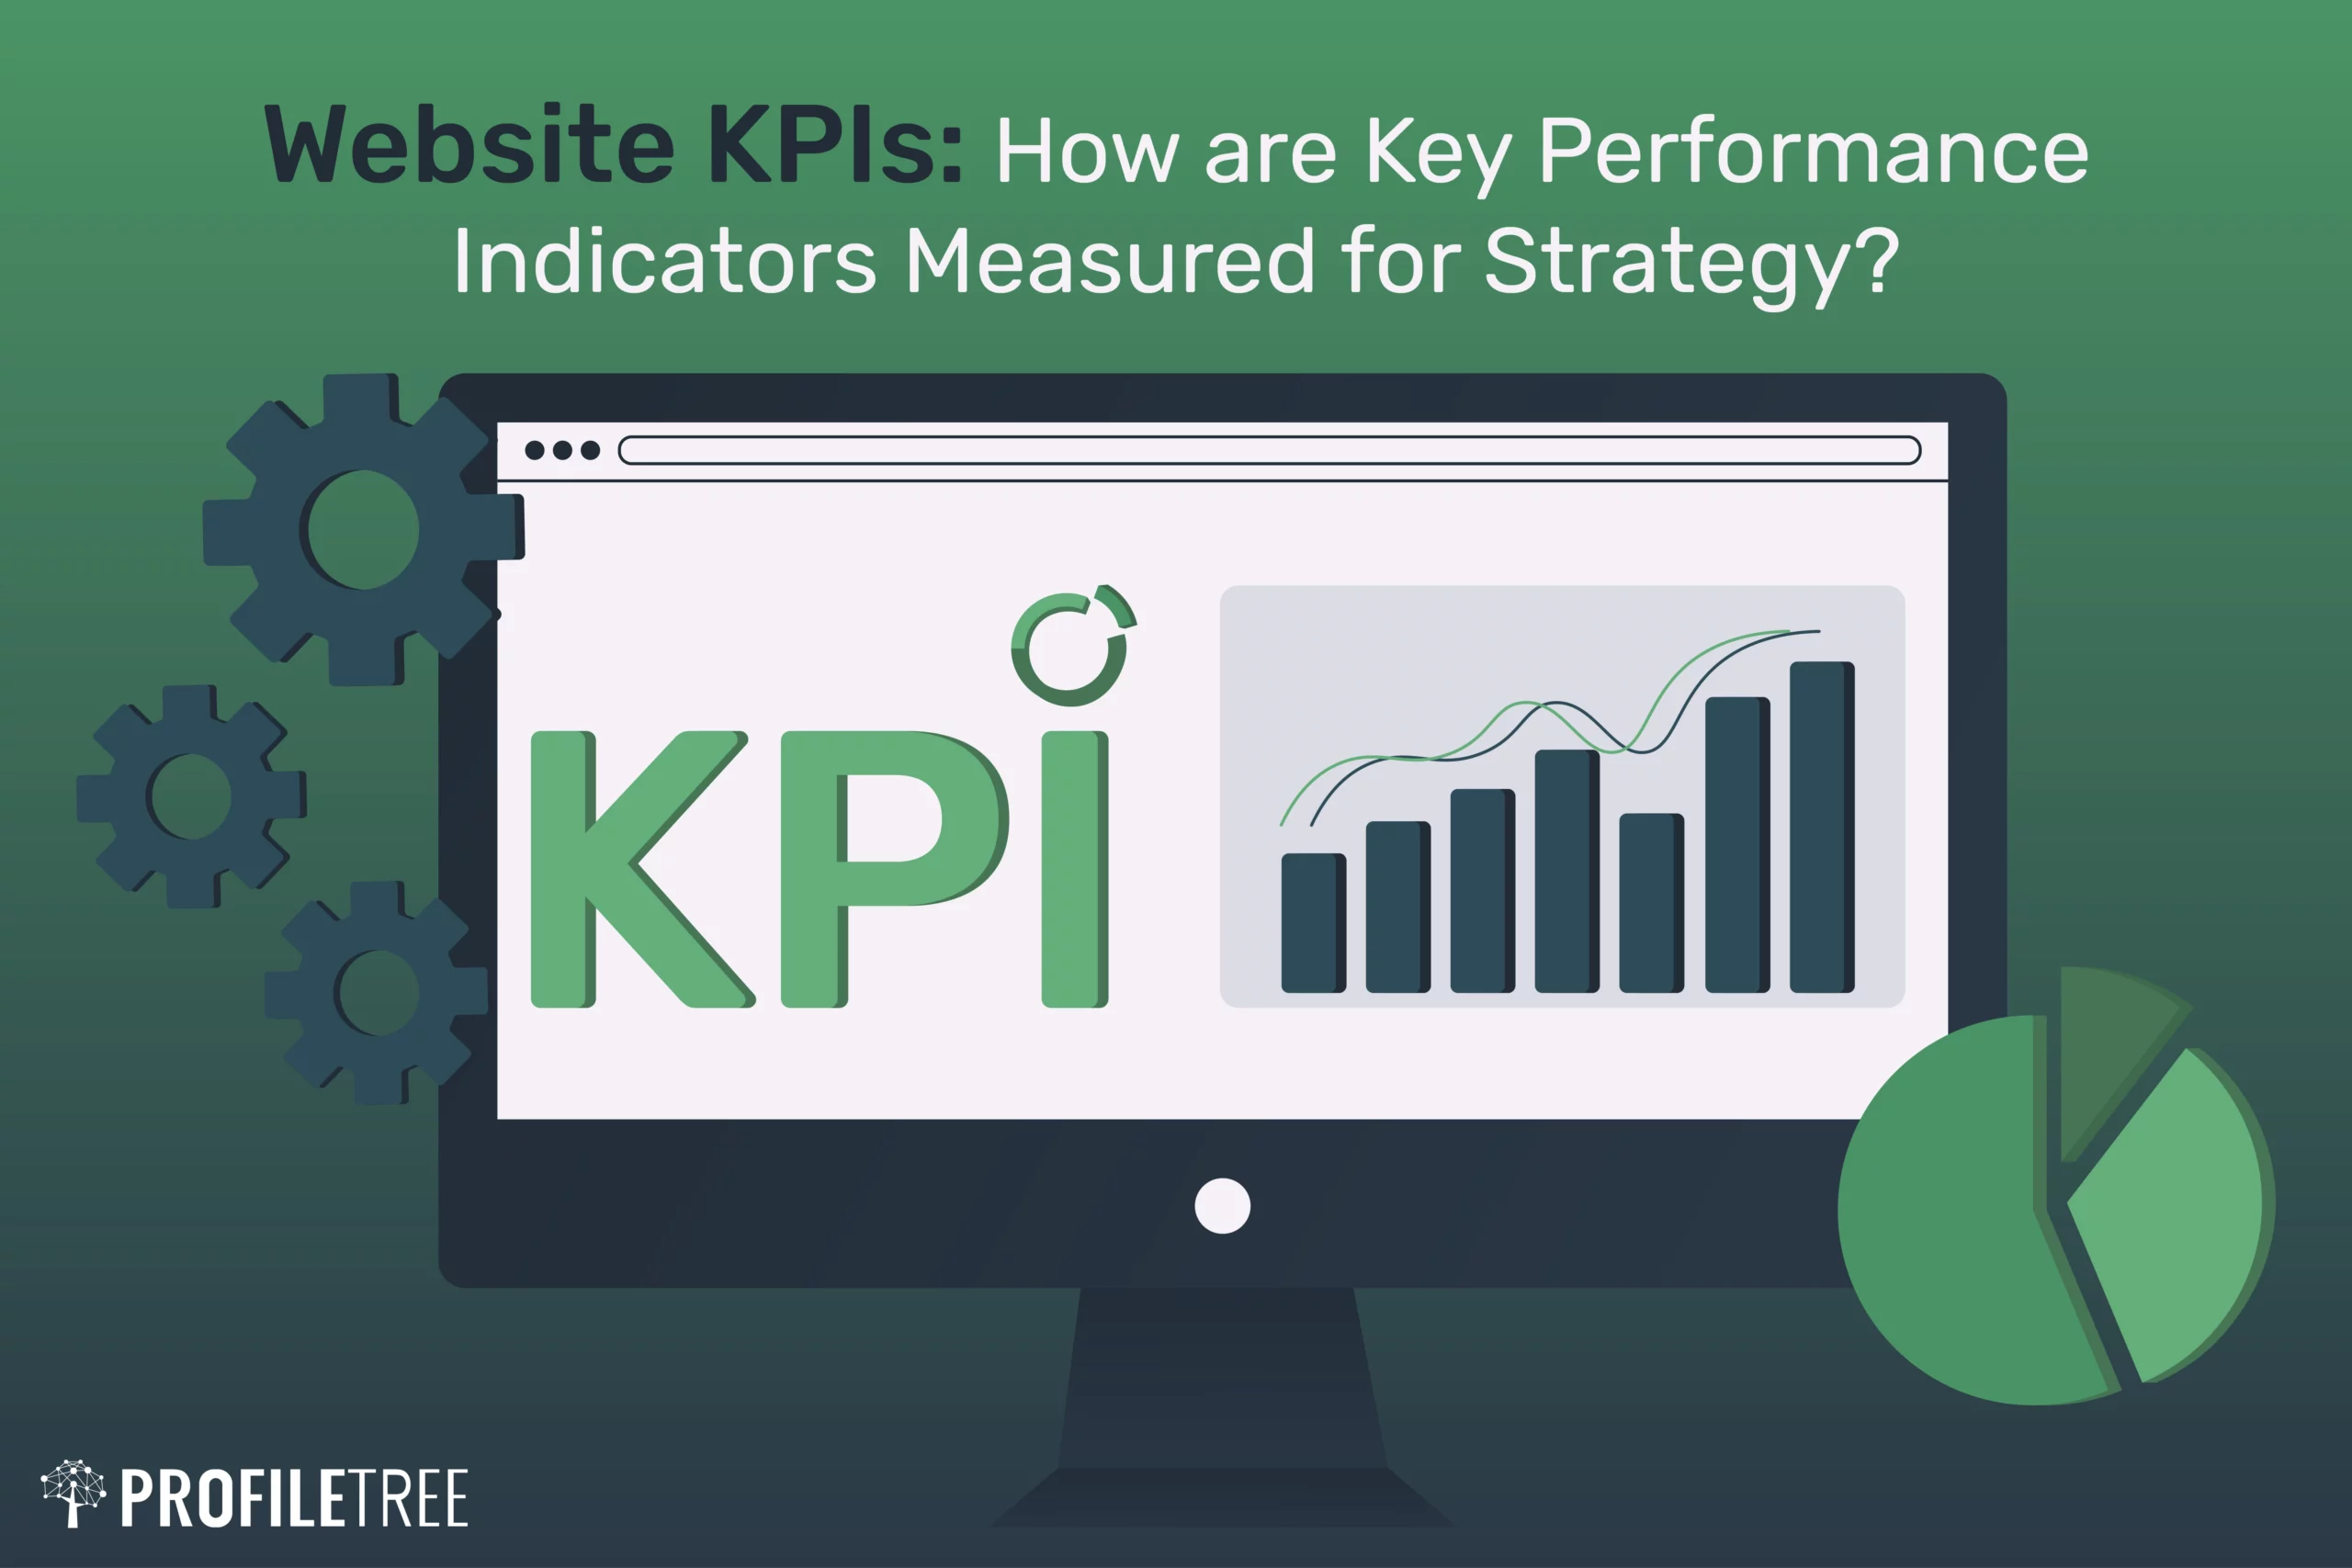 Website KPIs How are Key Performance Indicators Measured for Strategy